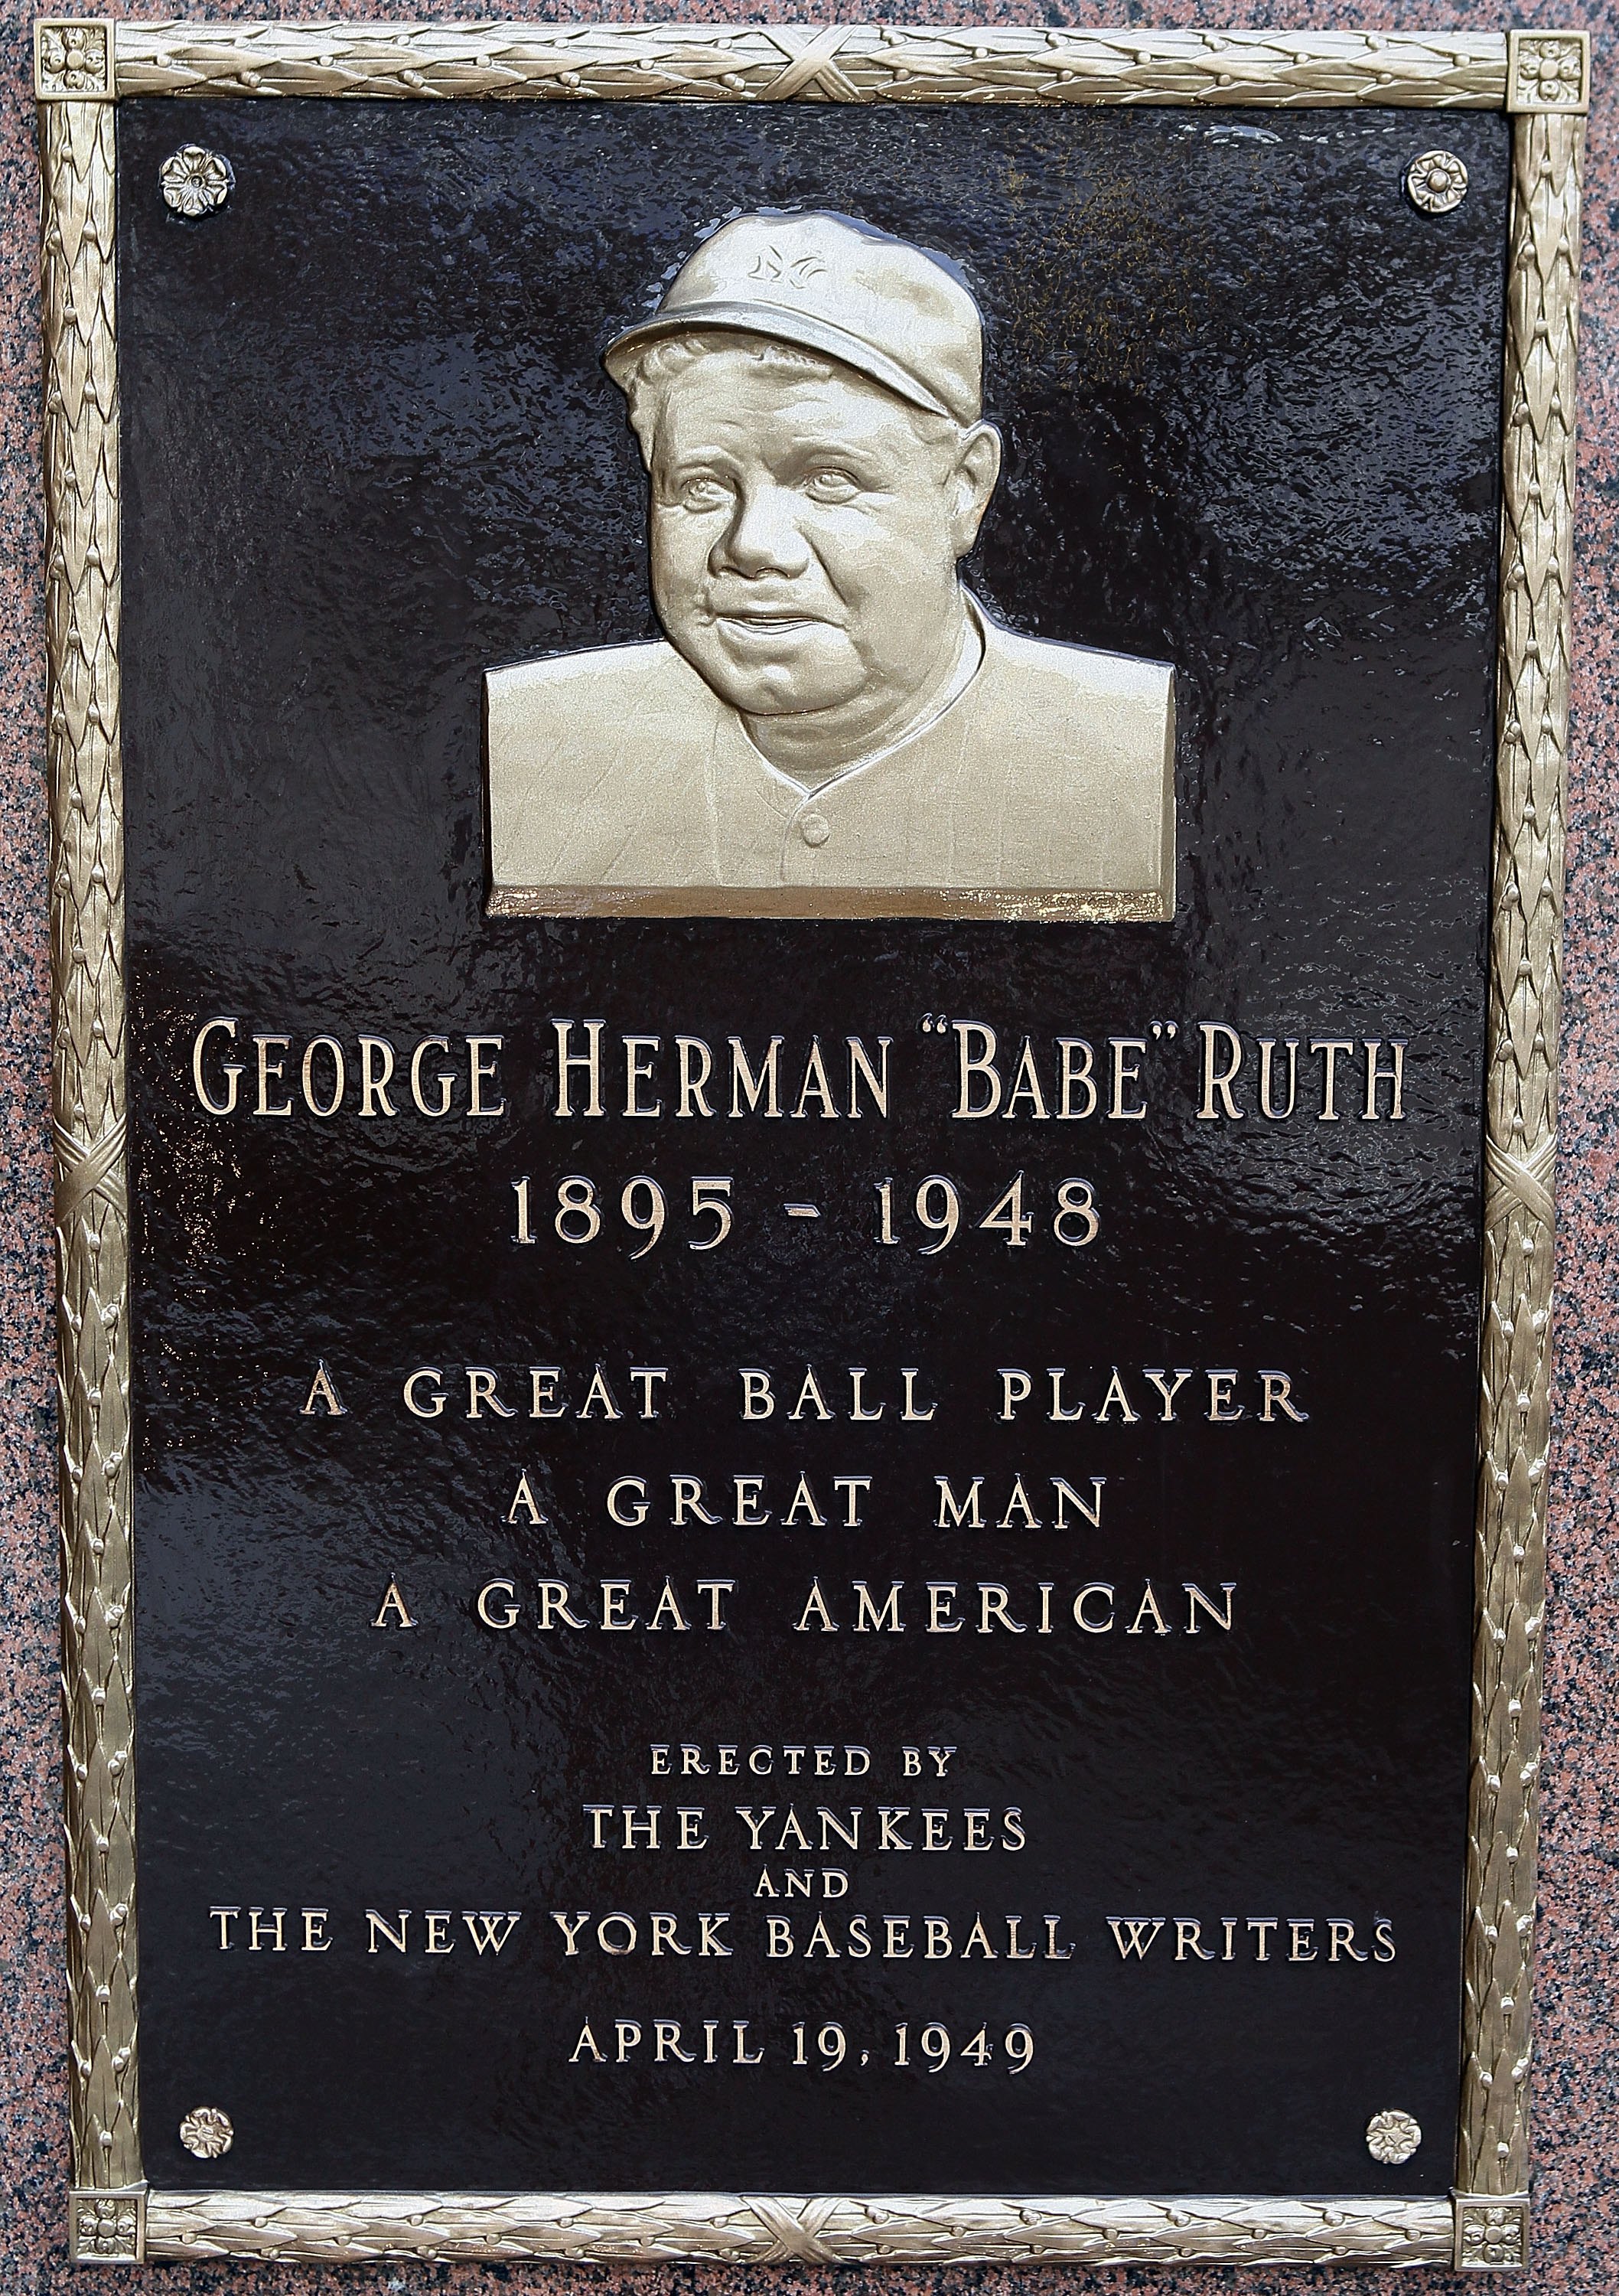 NEW YORK - MAY 02:  The plaque of Babe Ruth is seen in Monument Park at Yankee Stadium prior to game between the New York Yankees and the Chicago White Sox on May 2, 2010 in the Bronx borough of New York City. The Yankees defeated the White Sox 12-3.  (Ph